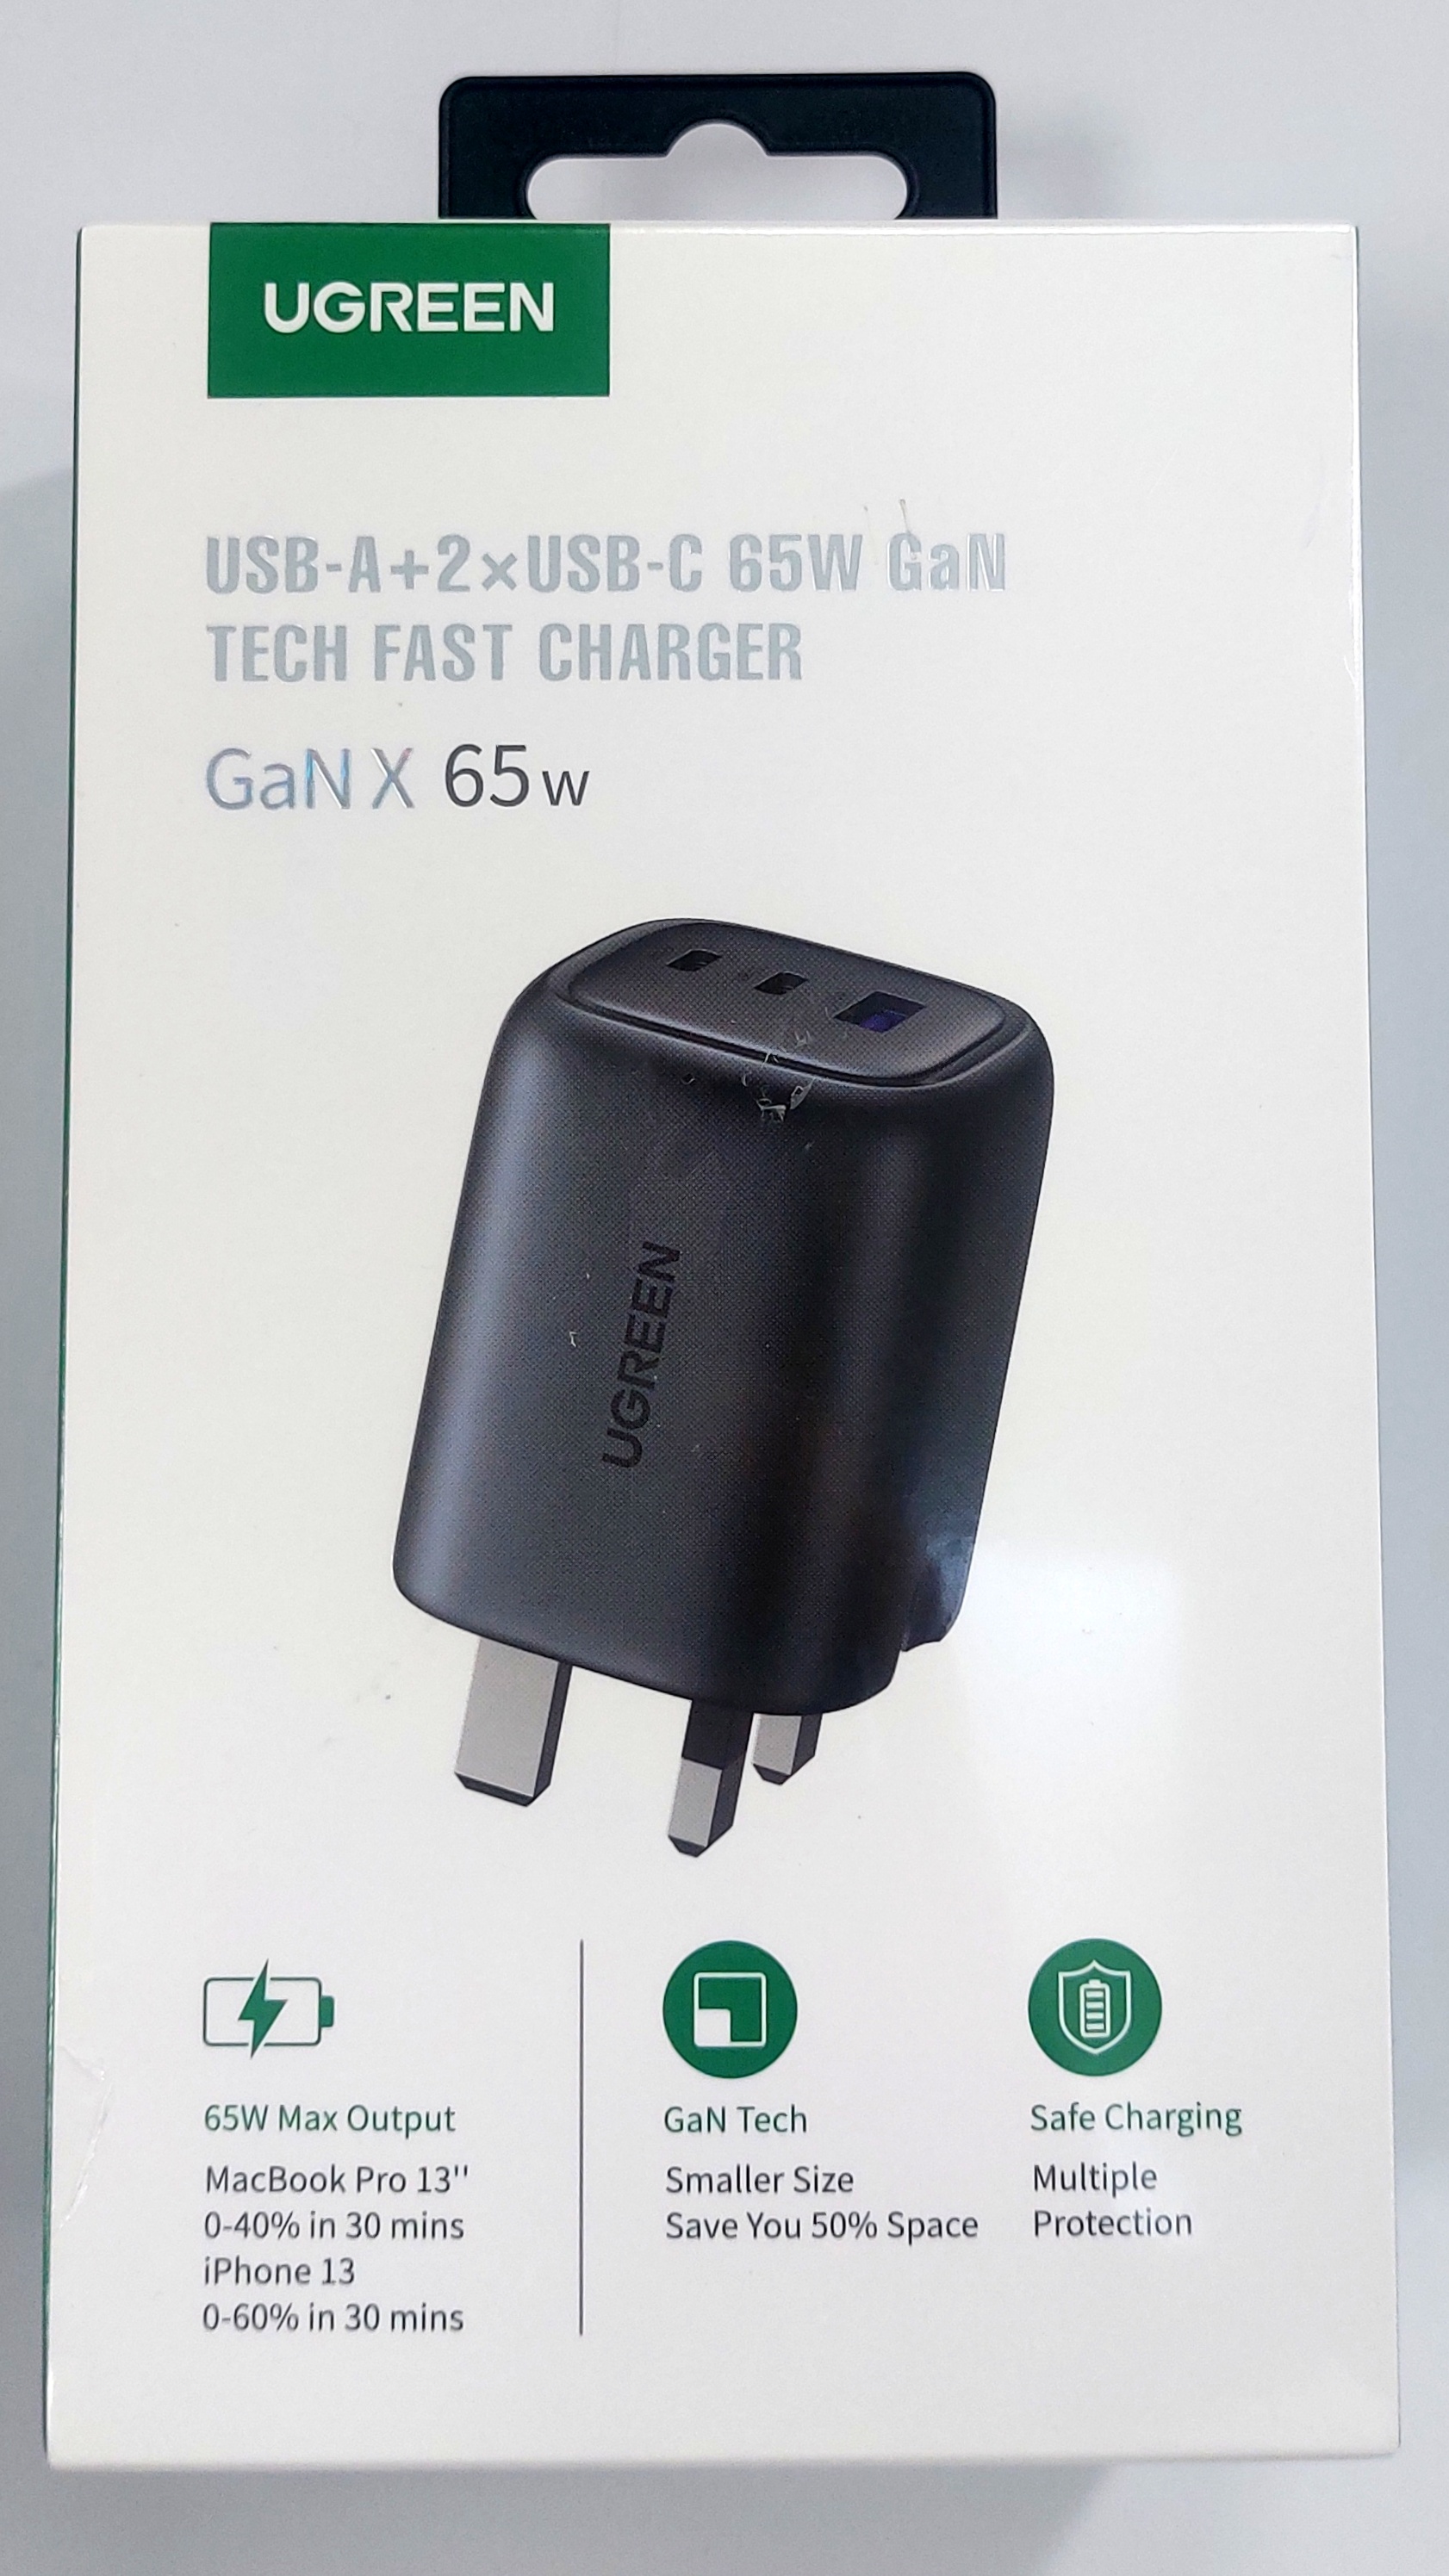 Ugreen 65W USB C Charger with 3-Ports – UGREEN